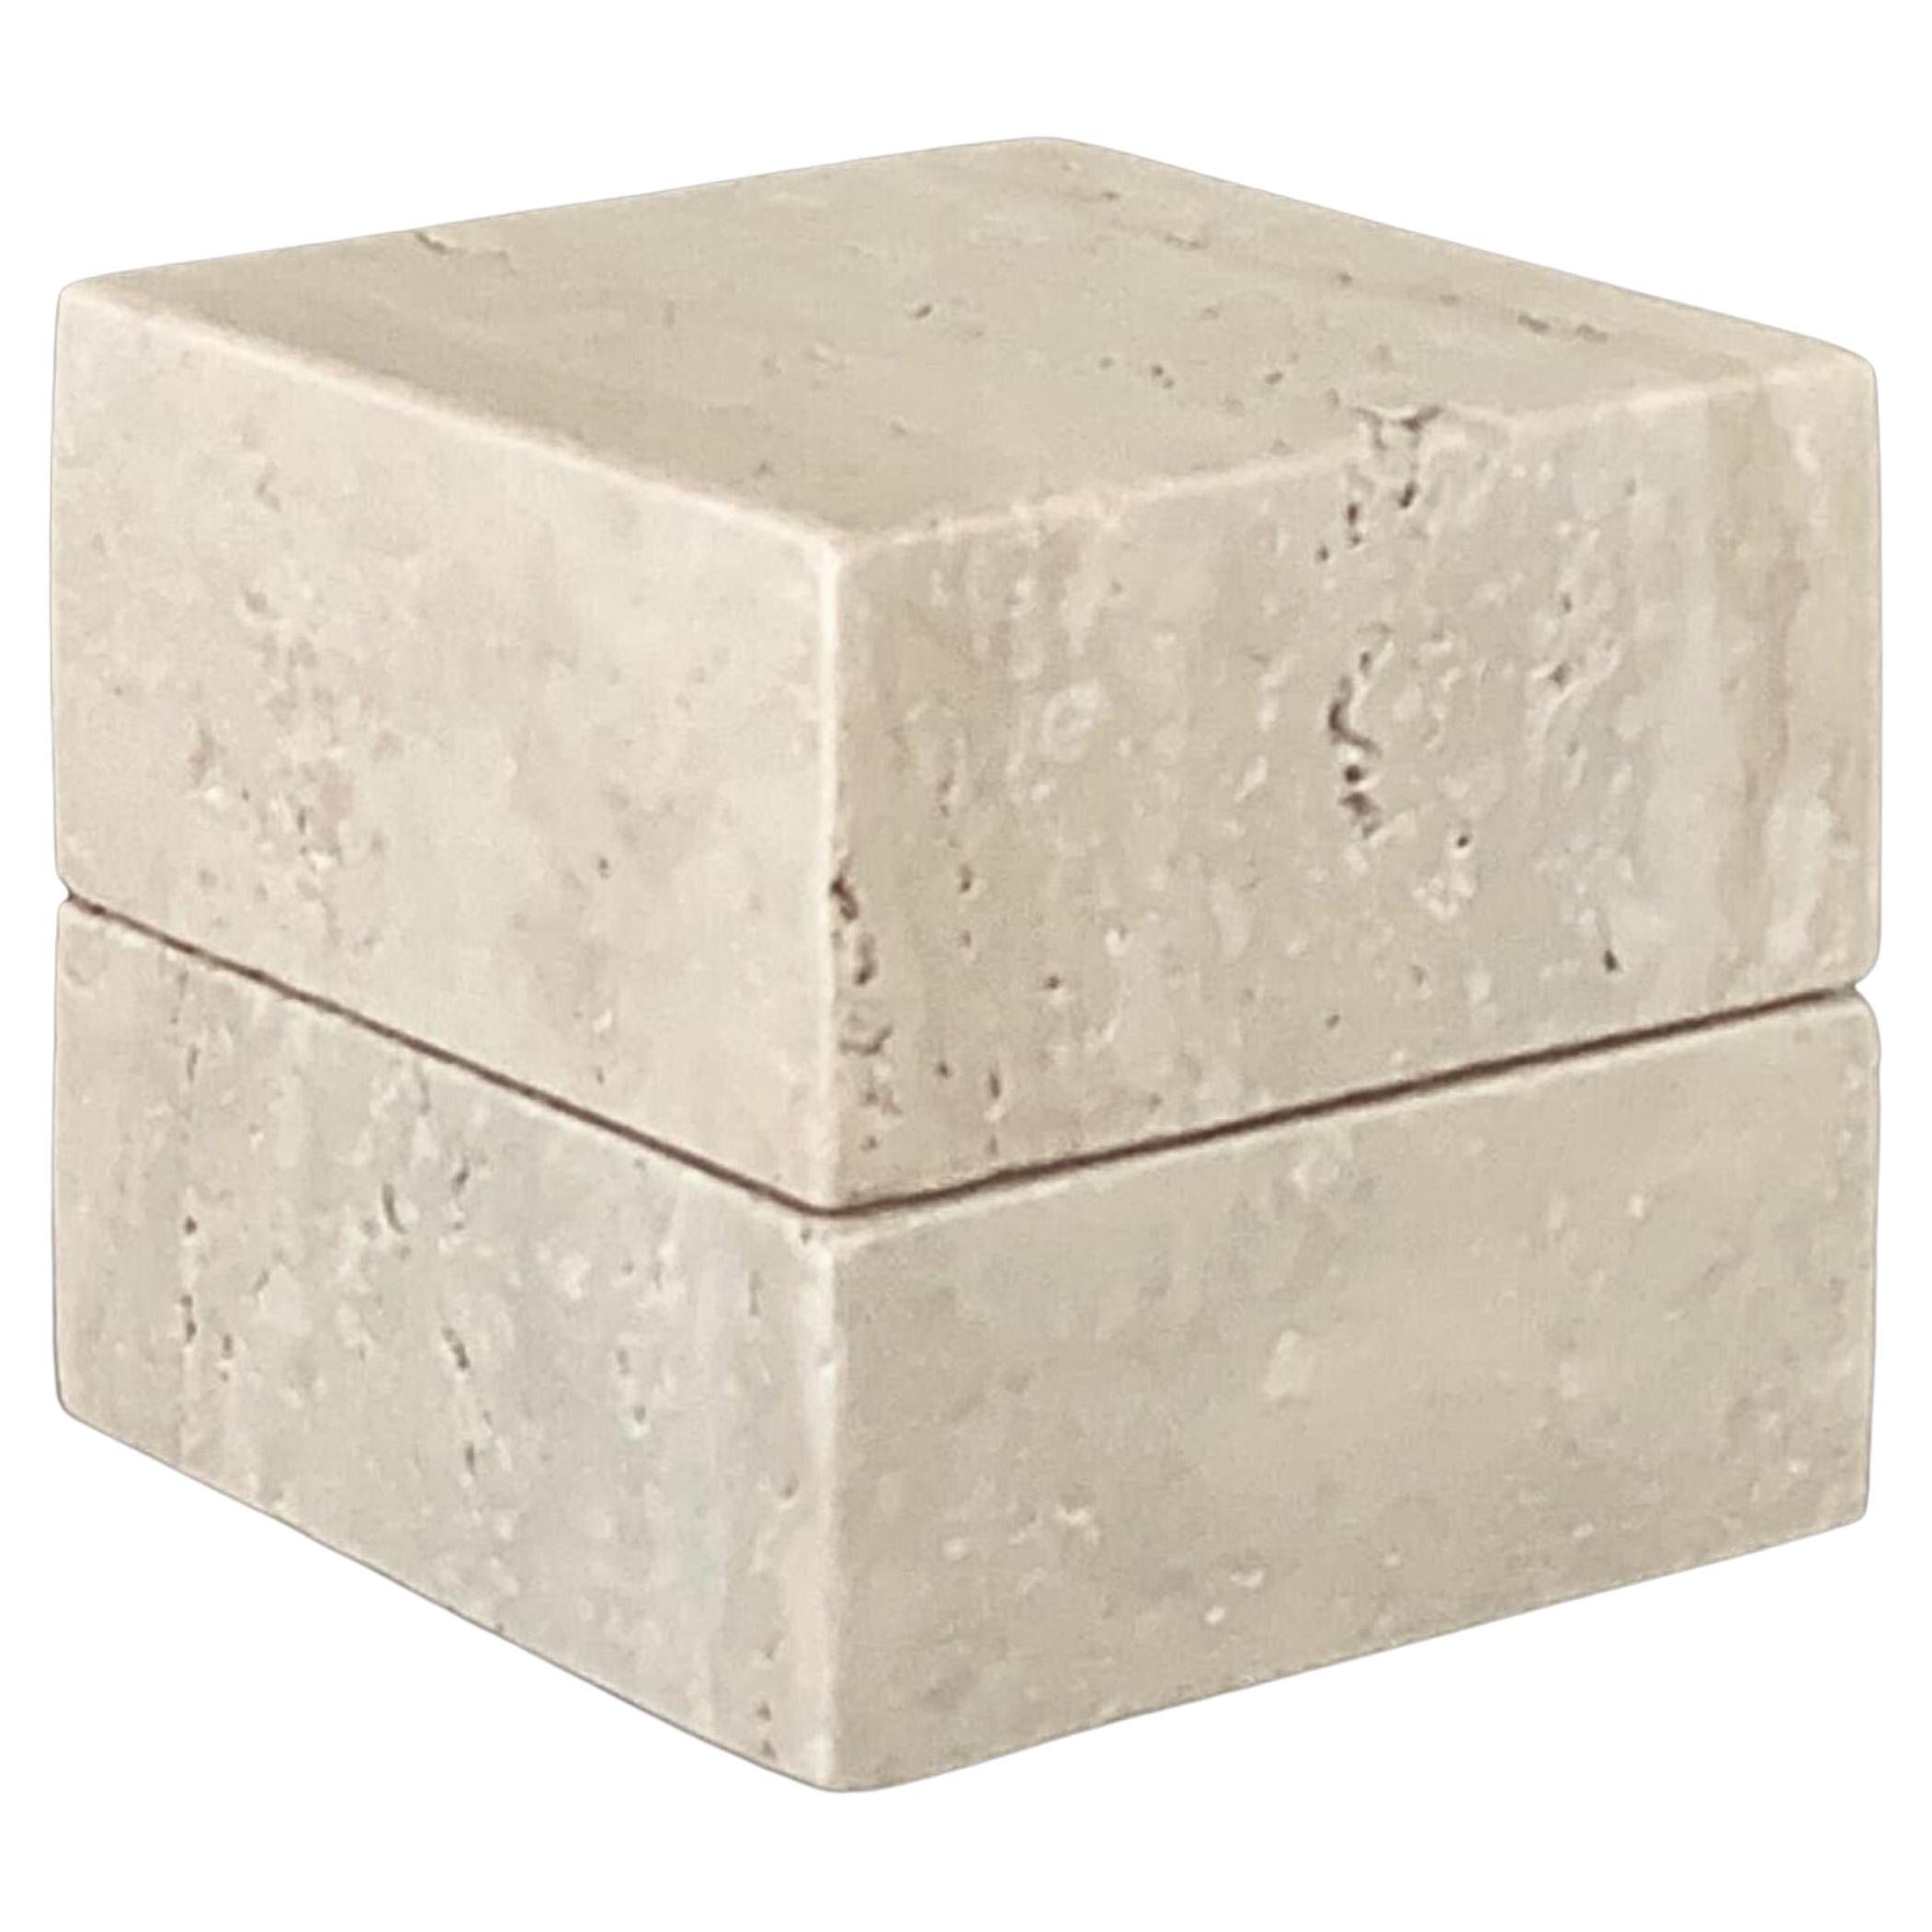 50/50 Box: Lidded Cube Box in Beige Travertine by Anastasio Home For Sale